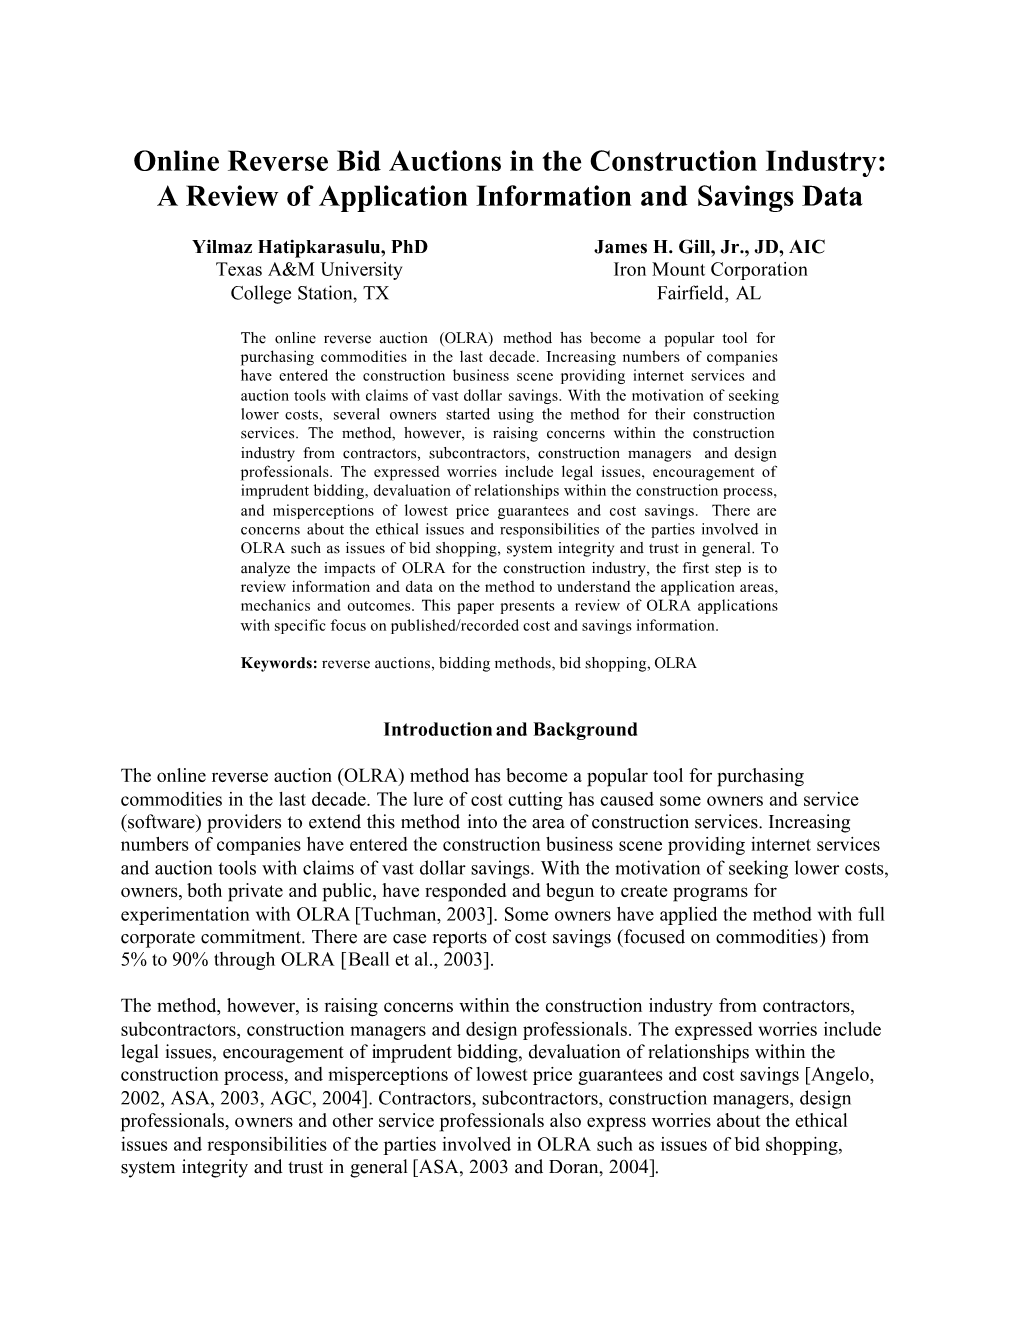 Online Reverse Bid Auctions in the Construction Industry: a Review of Application Information and Savings Data